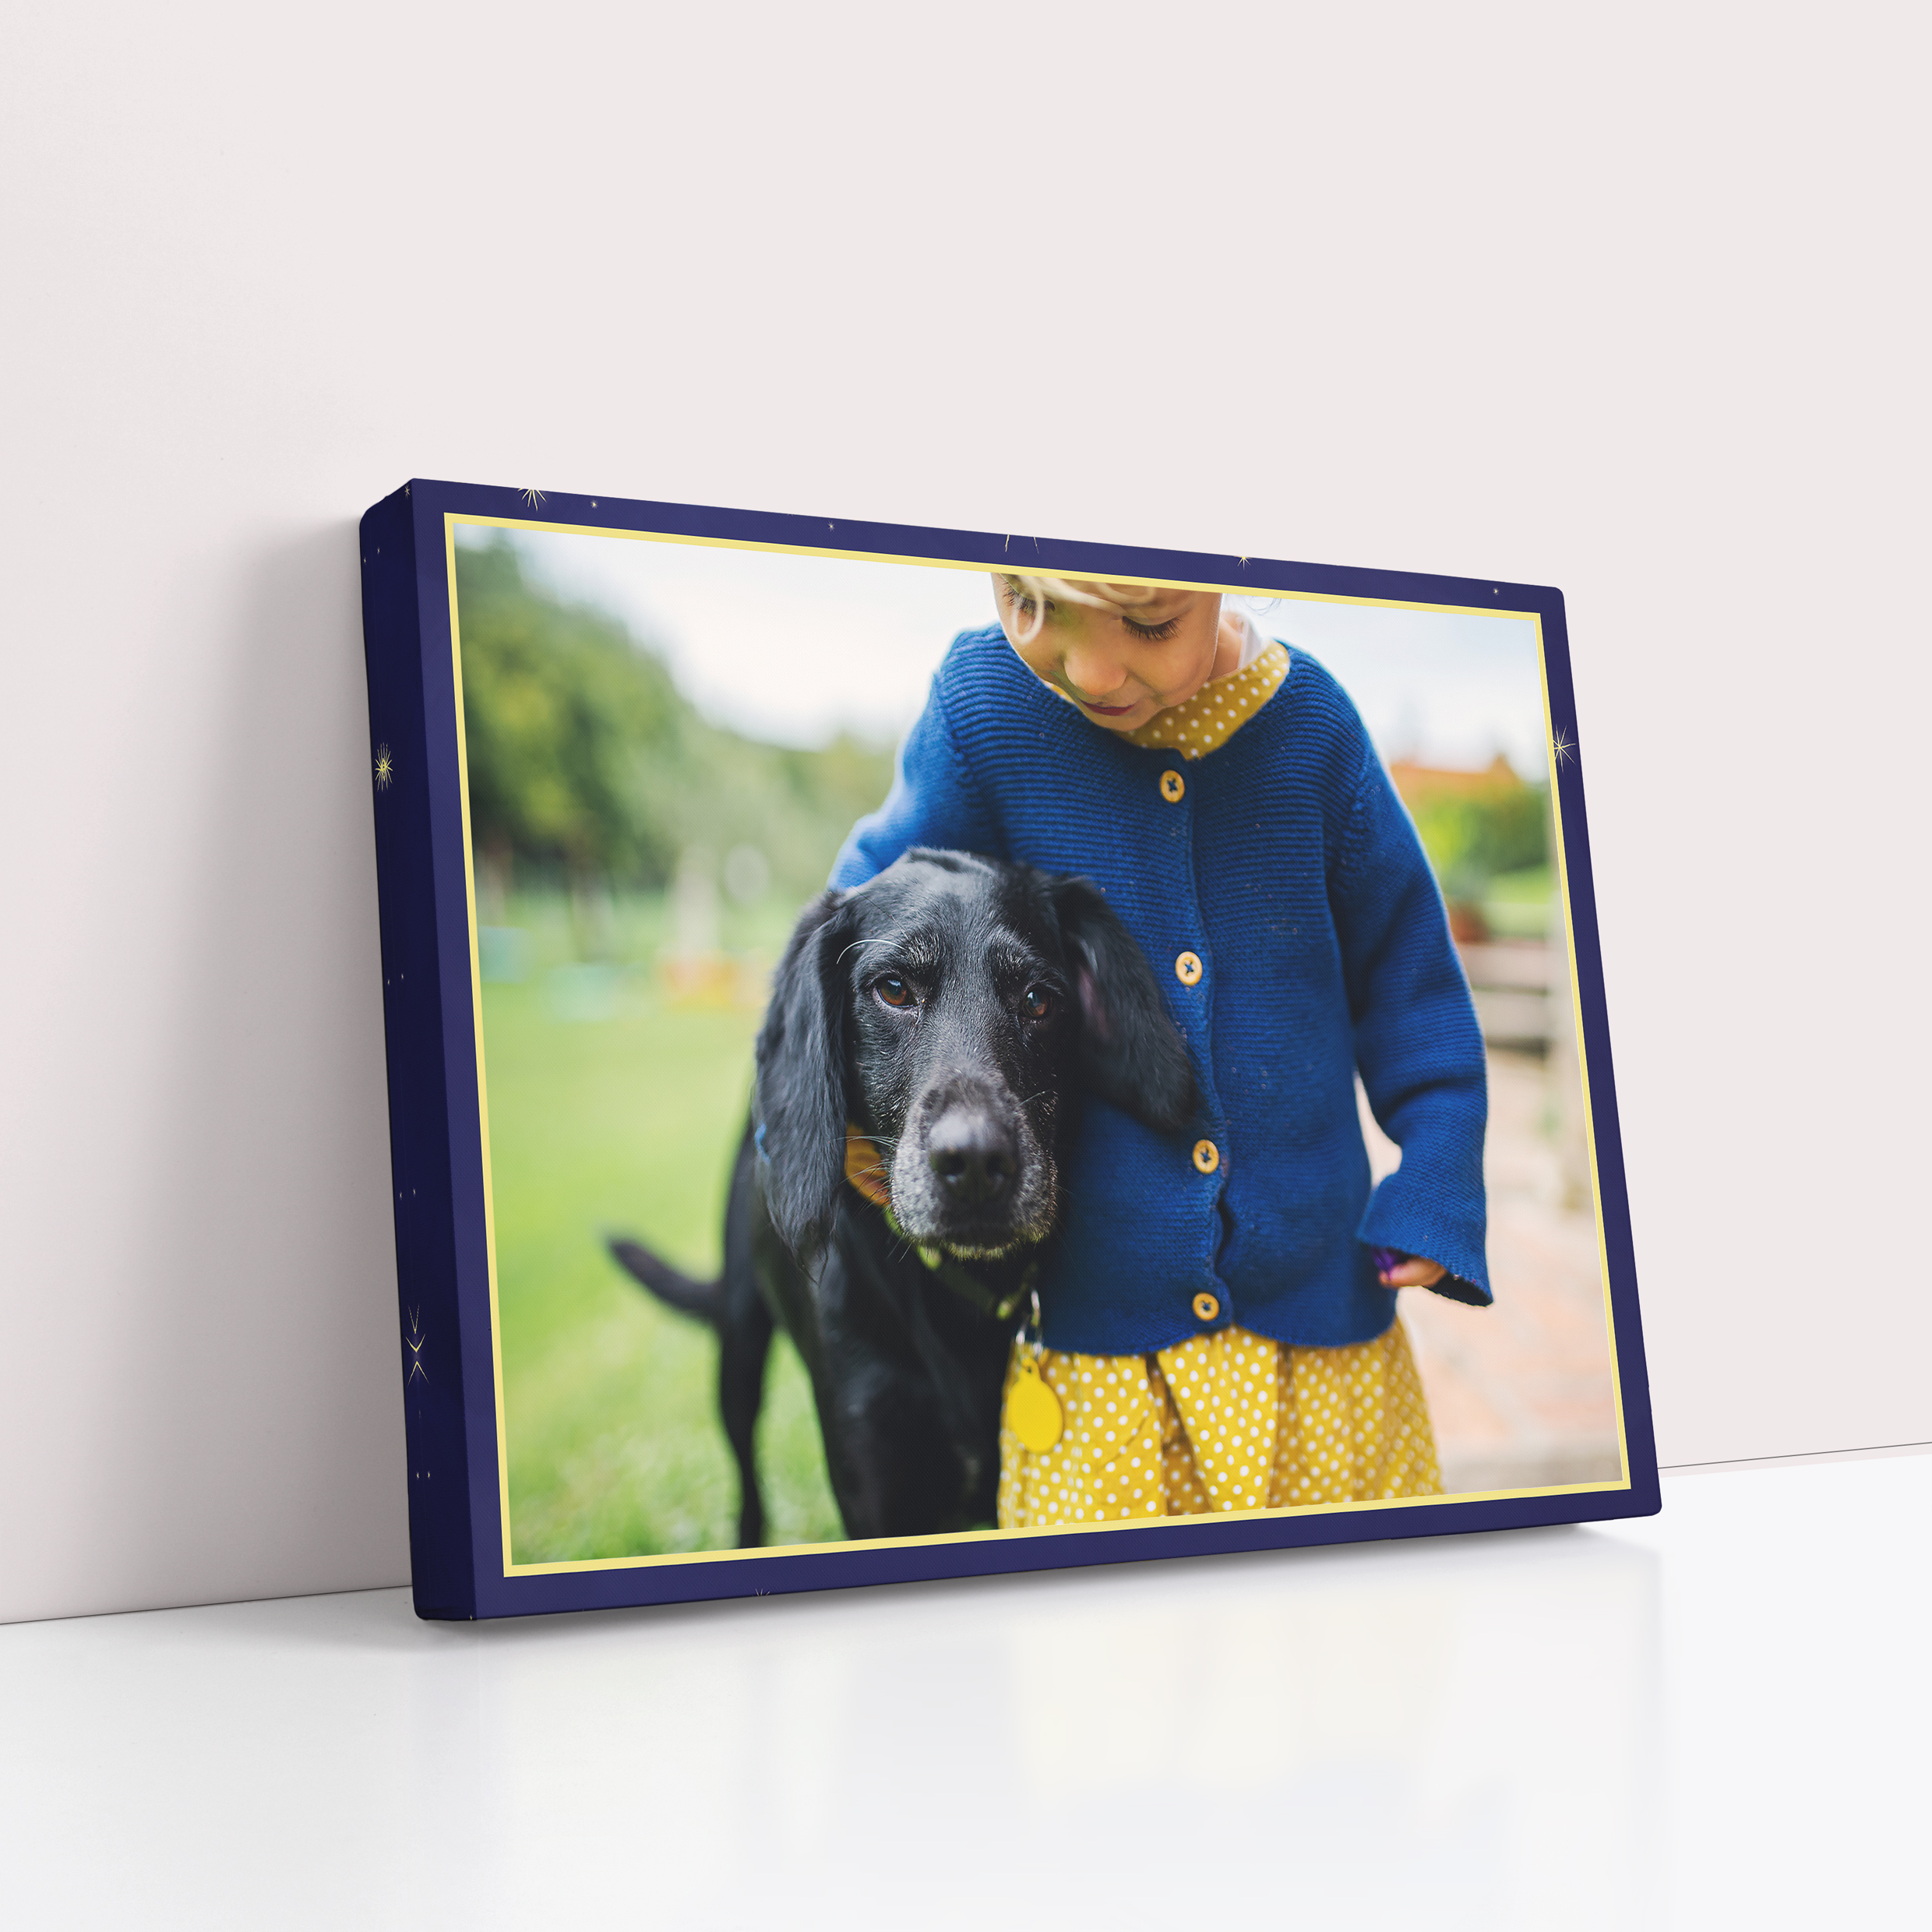 Night Wonder Personalised Stretch Canvas Print - Craft a bespoke treasure to immortalize your memories